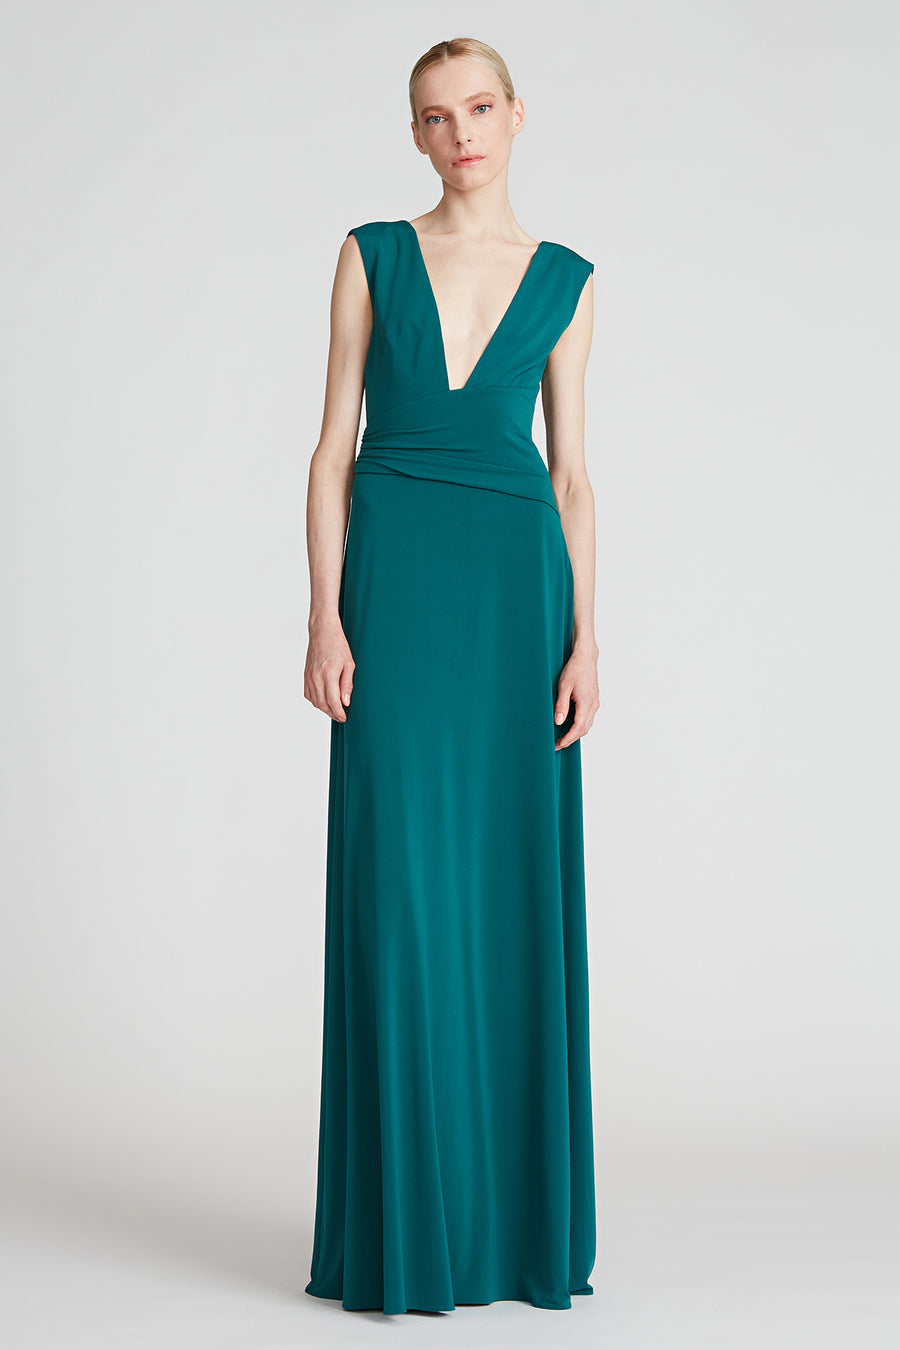 Tory Jersey V Neck Gown